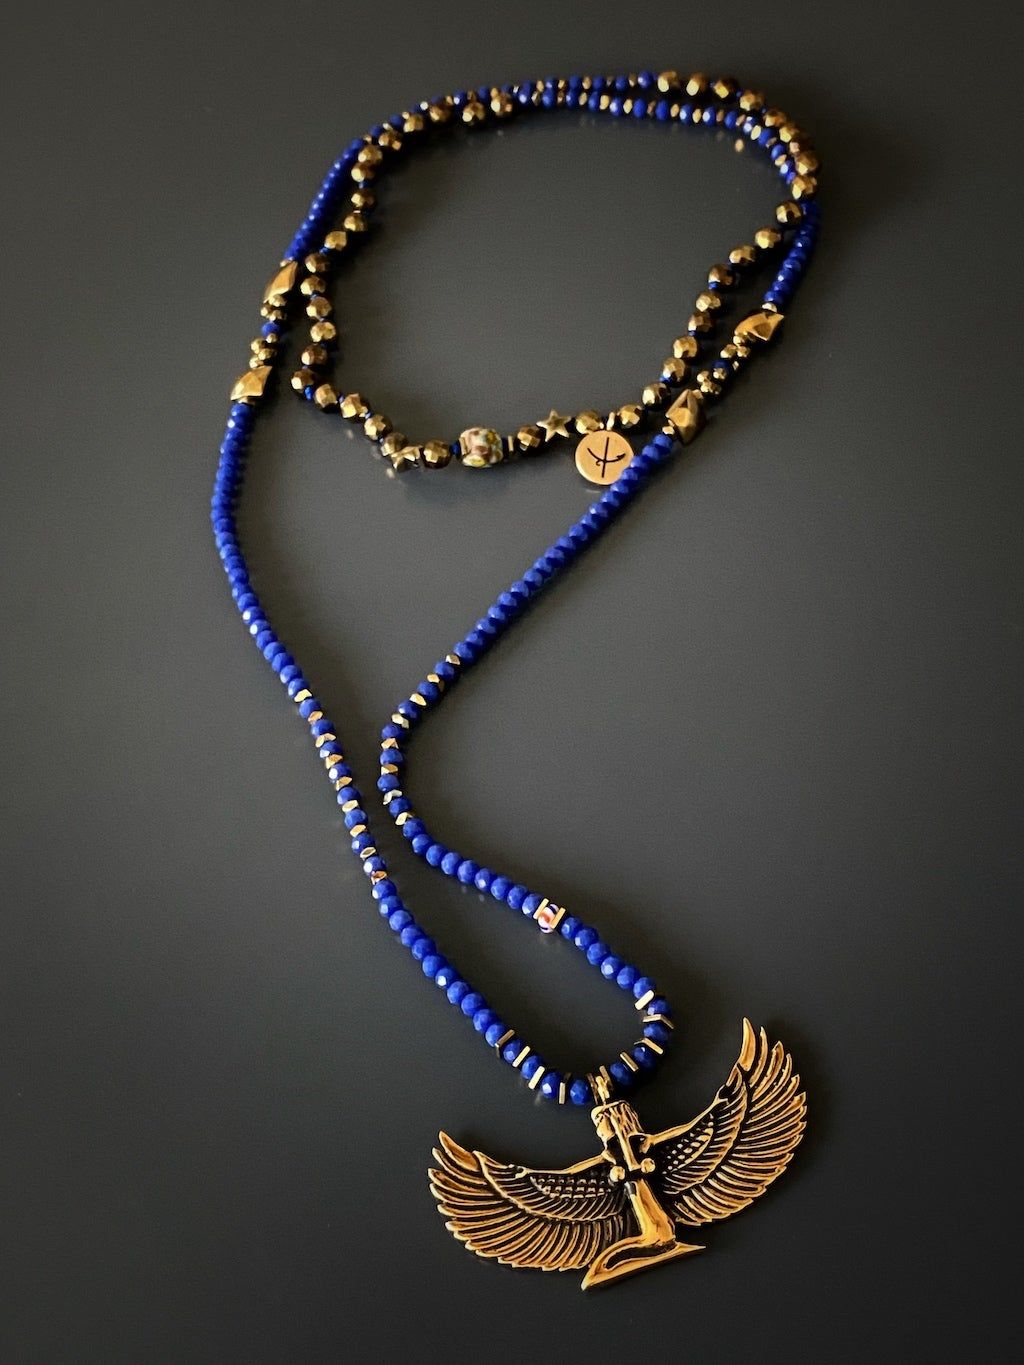 Goddess Isis Necklace featuring a bronze pendant of the Egyptian goddess and blue crystal beads, symbolizing healing and feminine power.